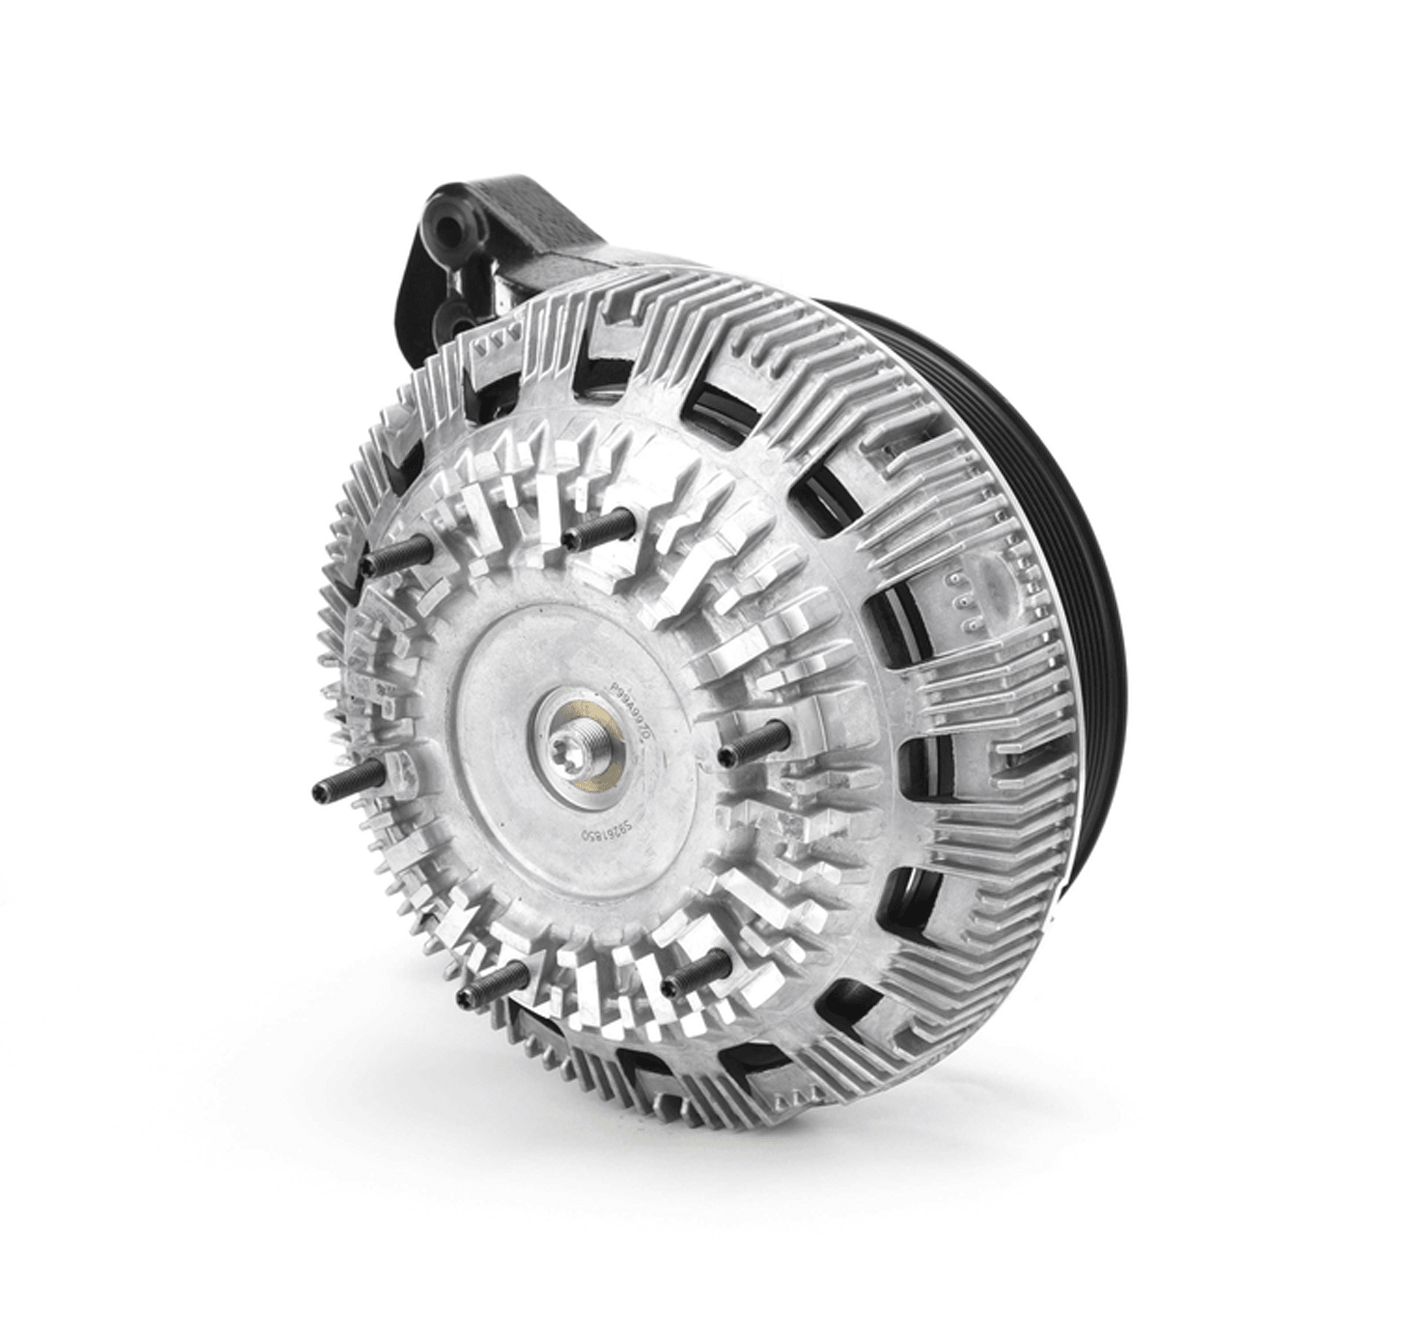 Hor99A9970 Genuine International Fan Clutch Cooling System - ADVANCED TRUCK PARTS